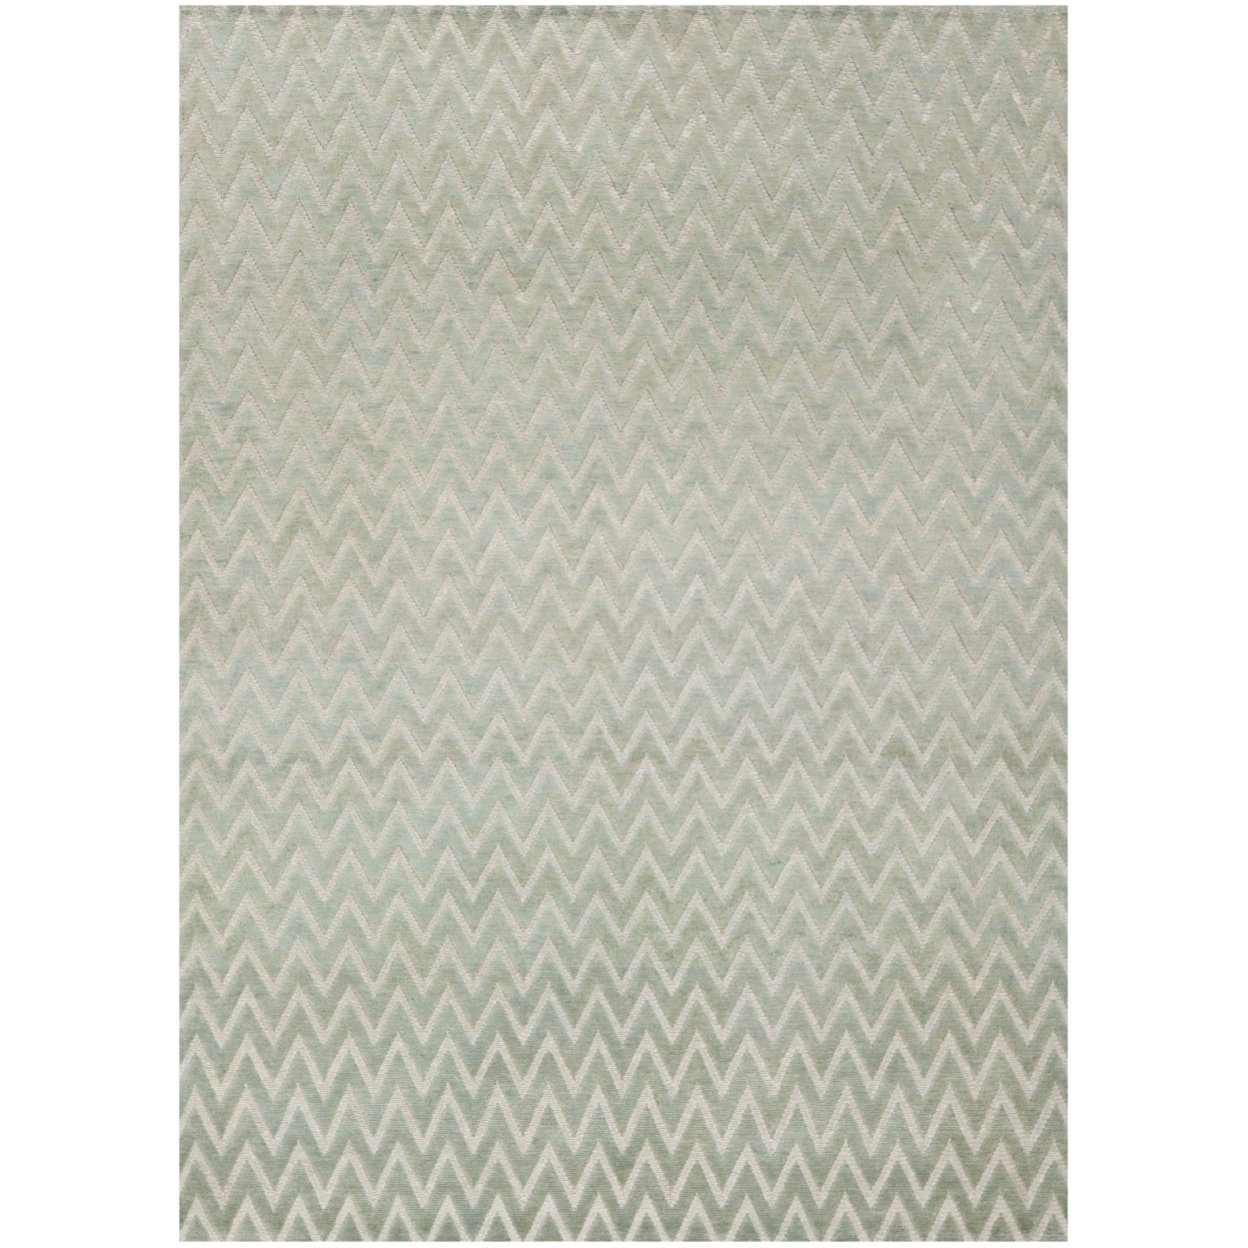 SAFAVIEH Sierra Collection SRA410A Ivory / Rust Rug - 6' X 6' Square